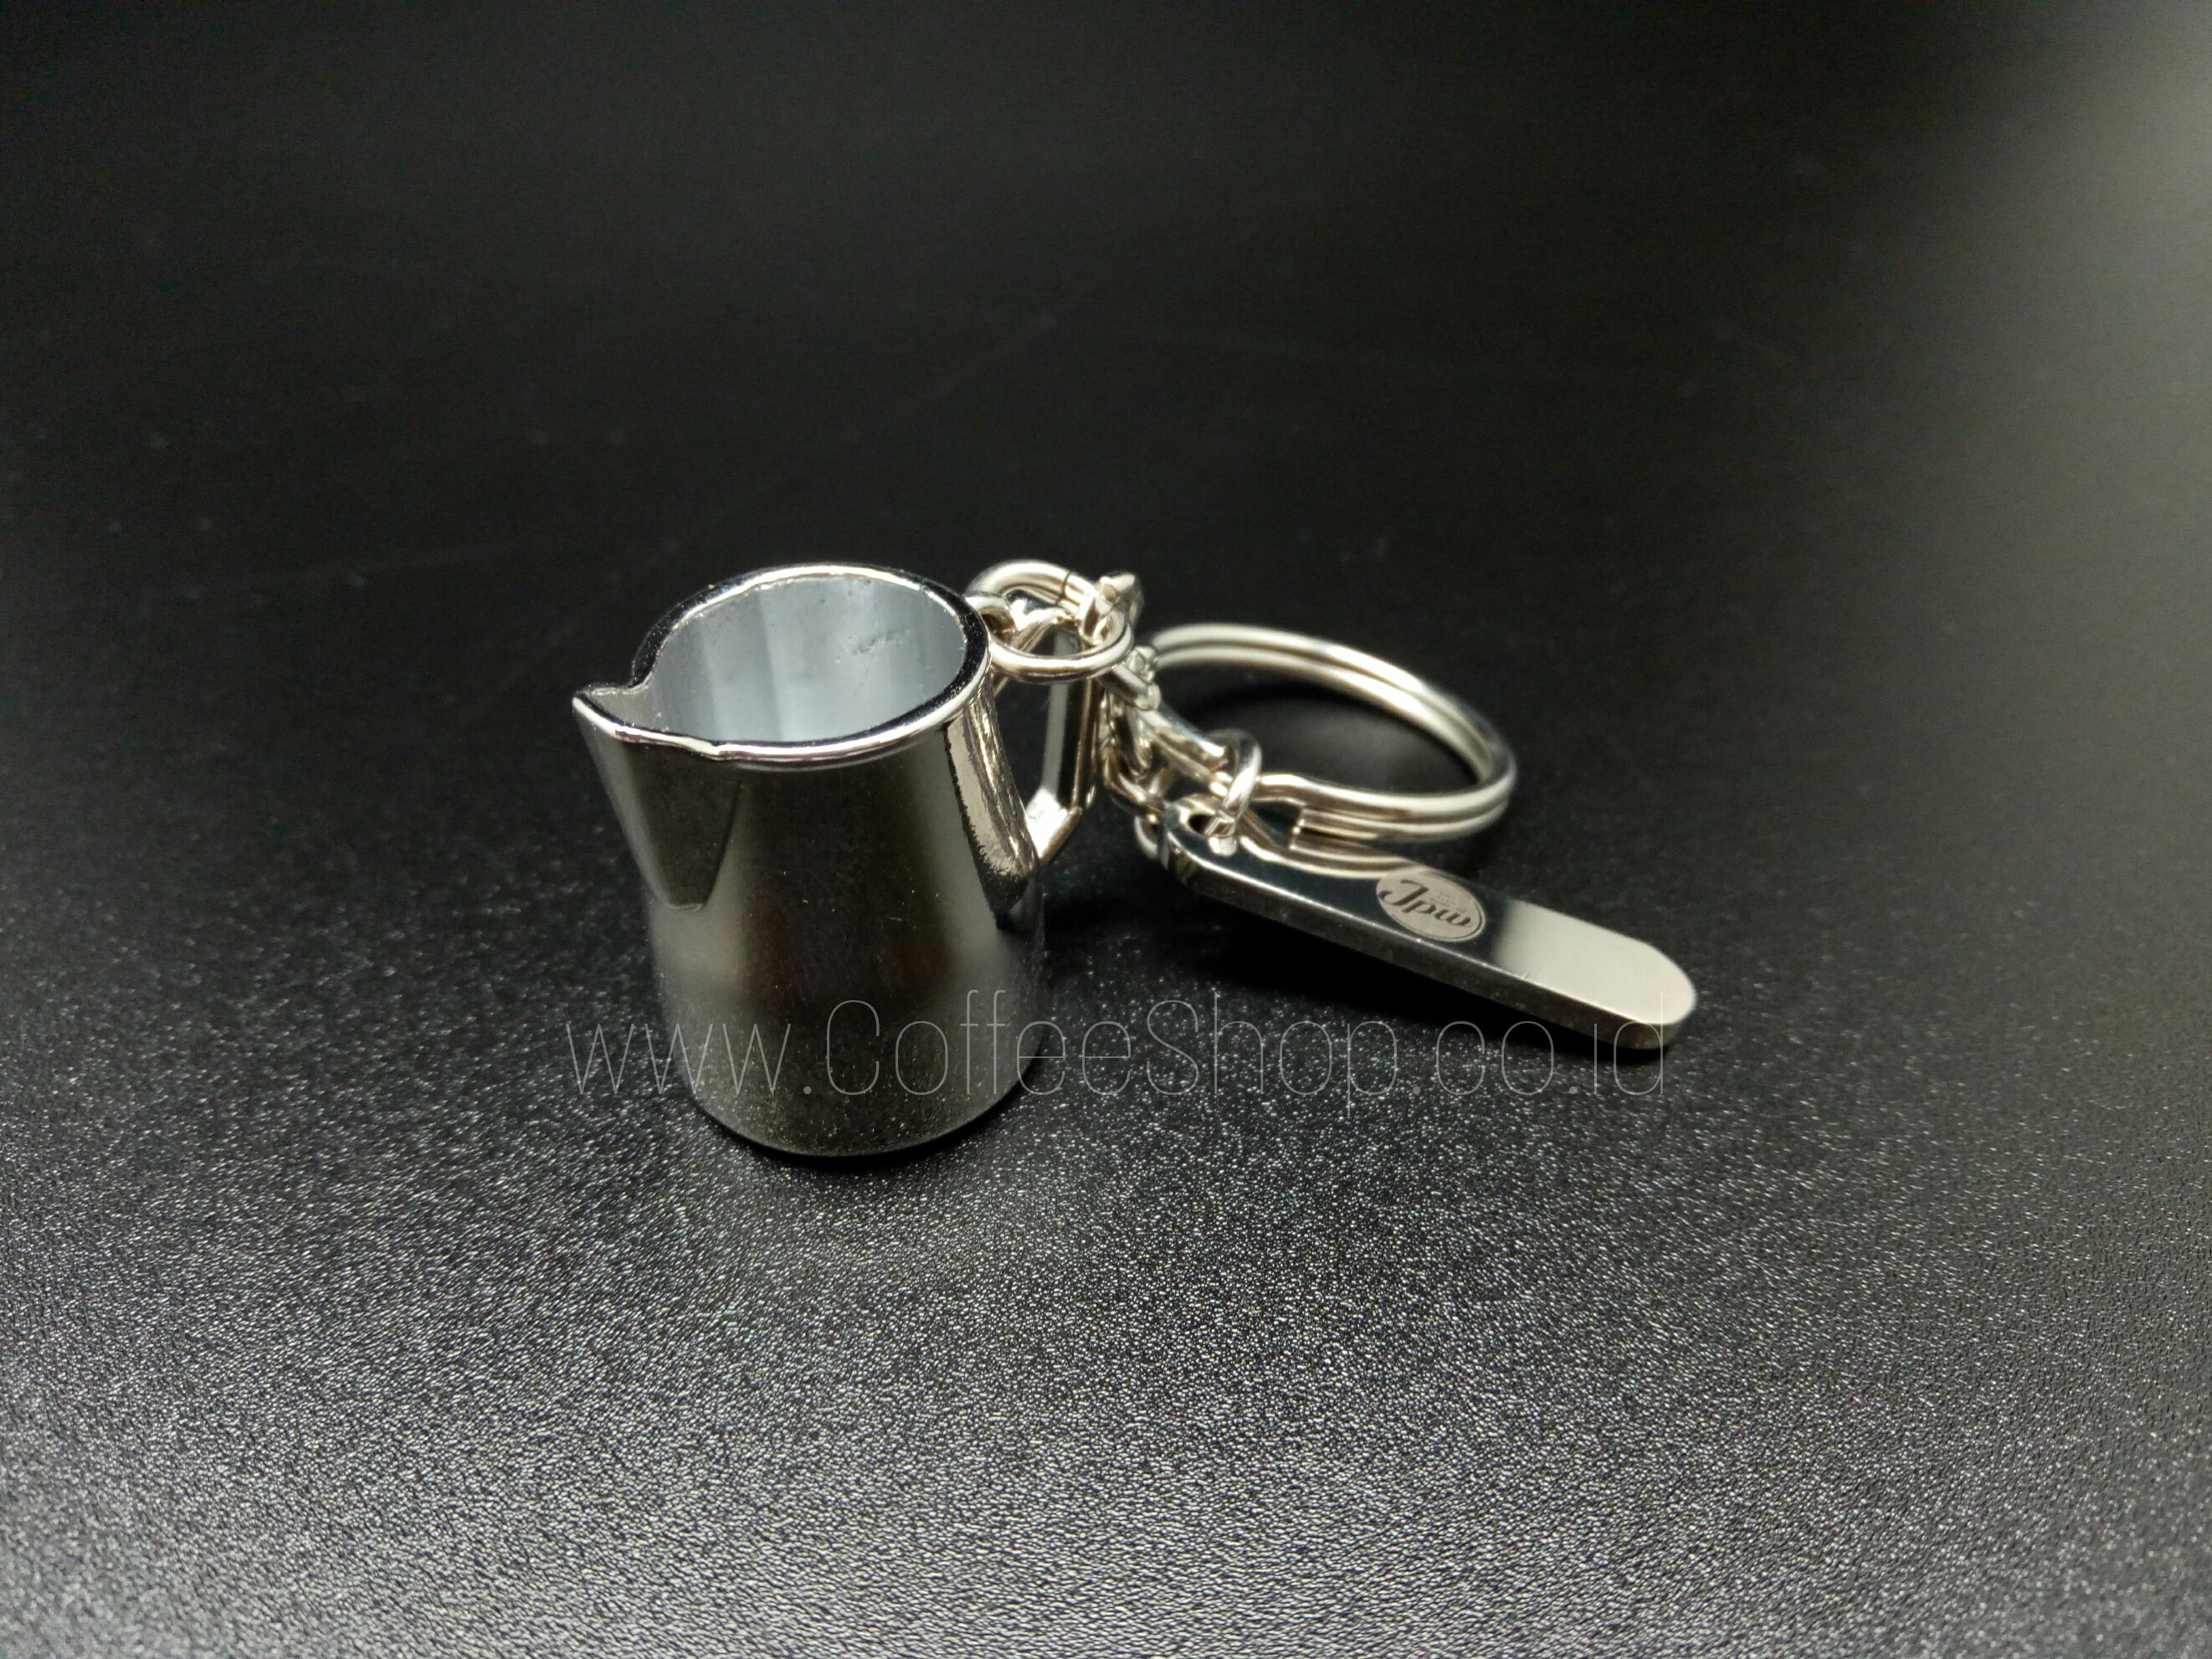 Keychain Stainless Tamper Model